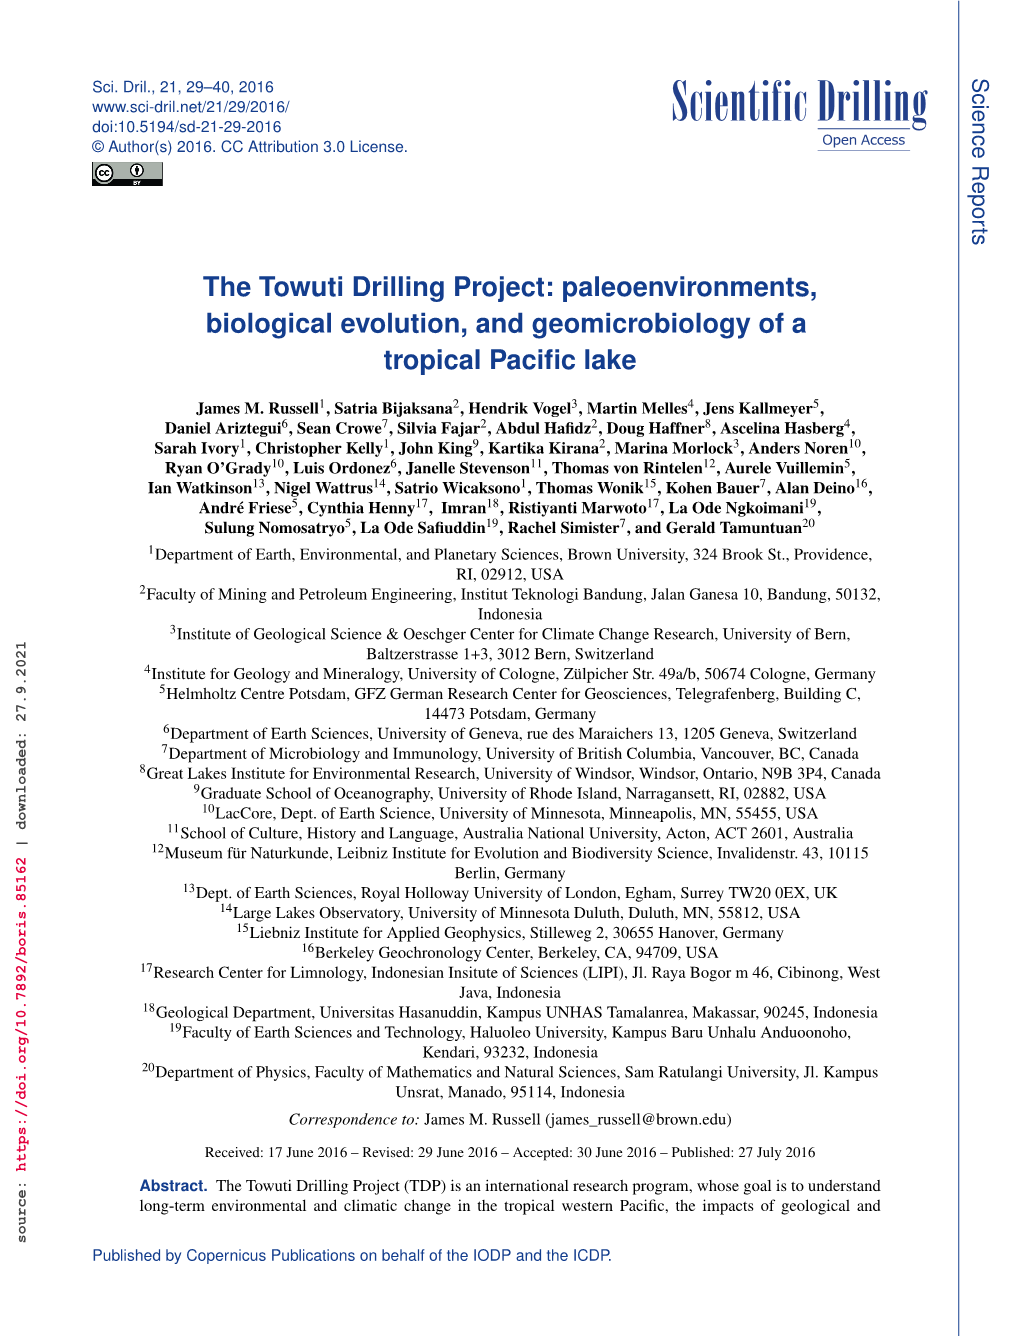 The Towuti Drilling Project